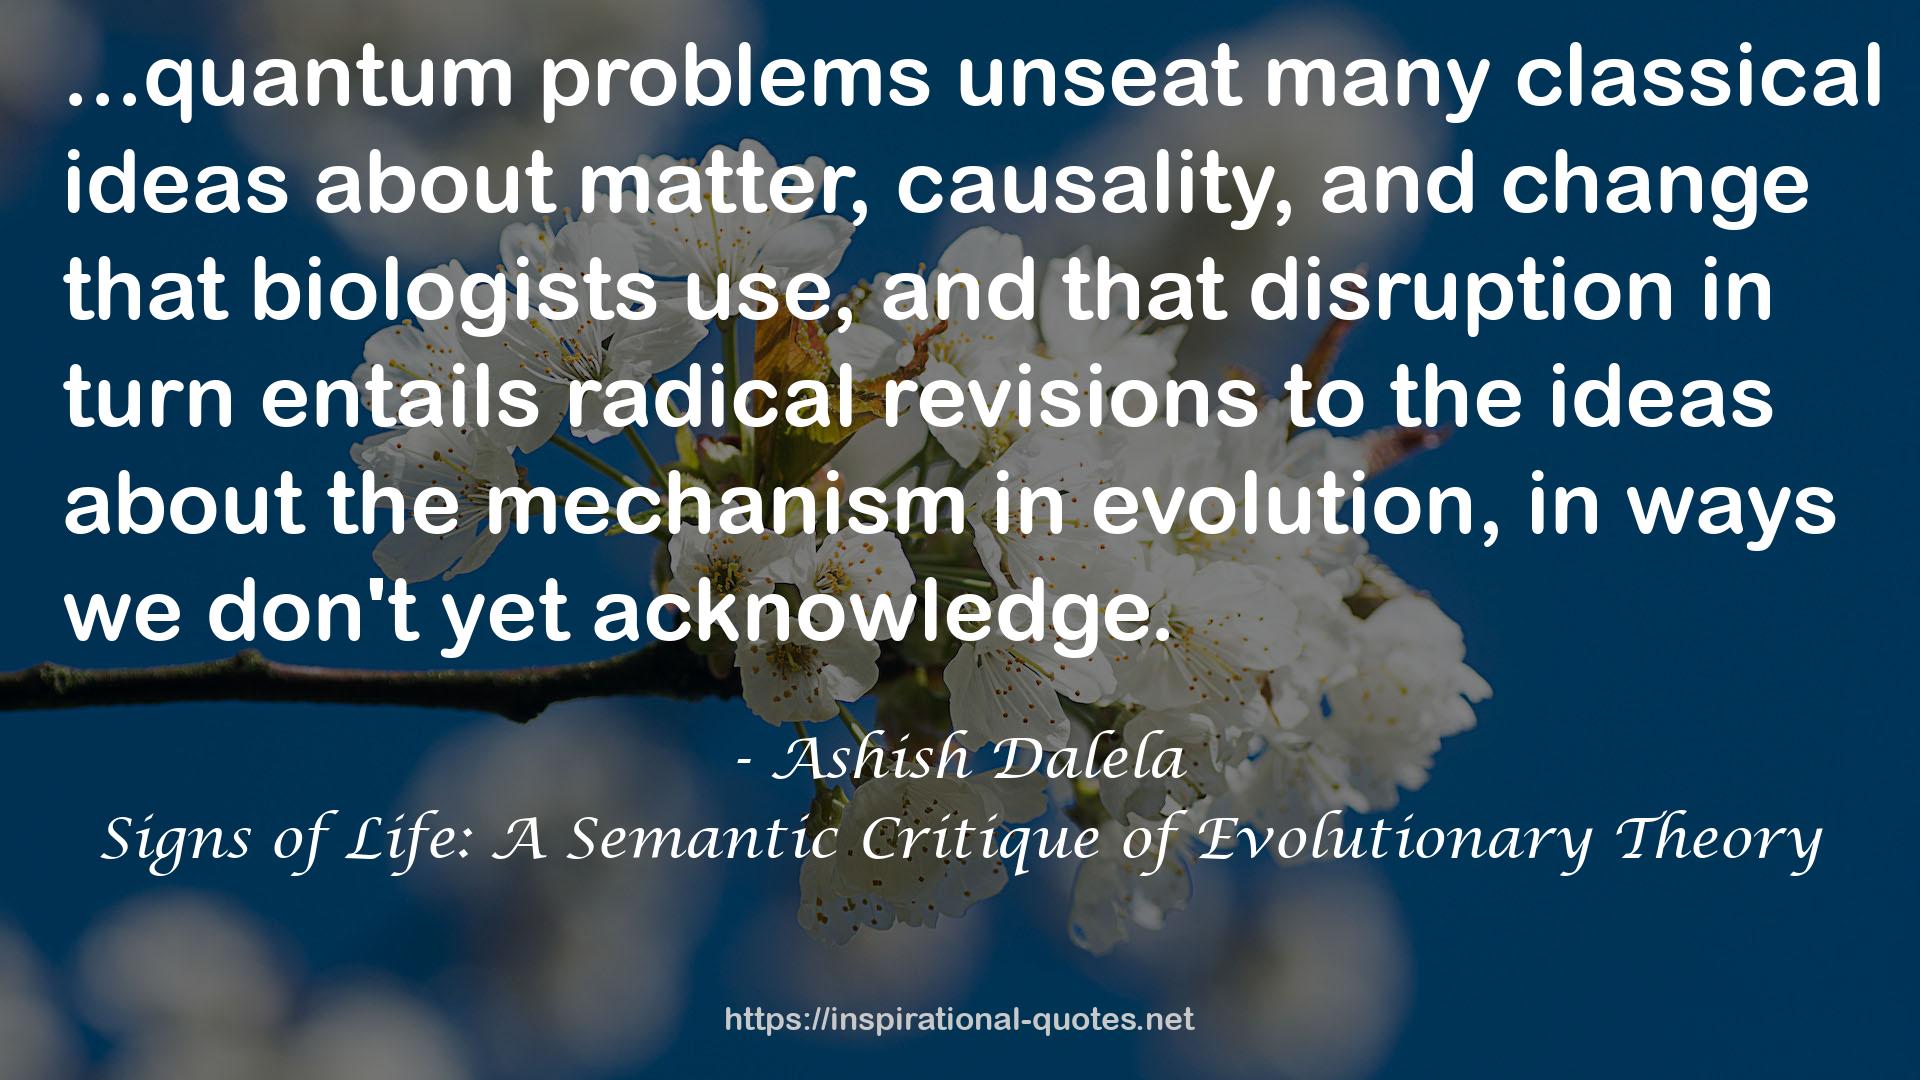 Signs of Life: A Semantic Critique of Evolutionary Theory QUOTES